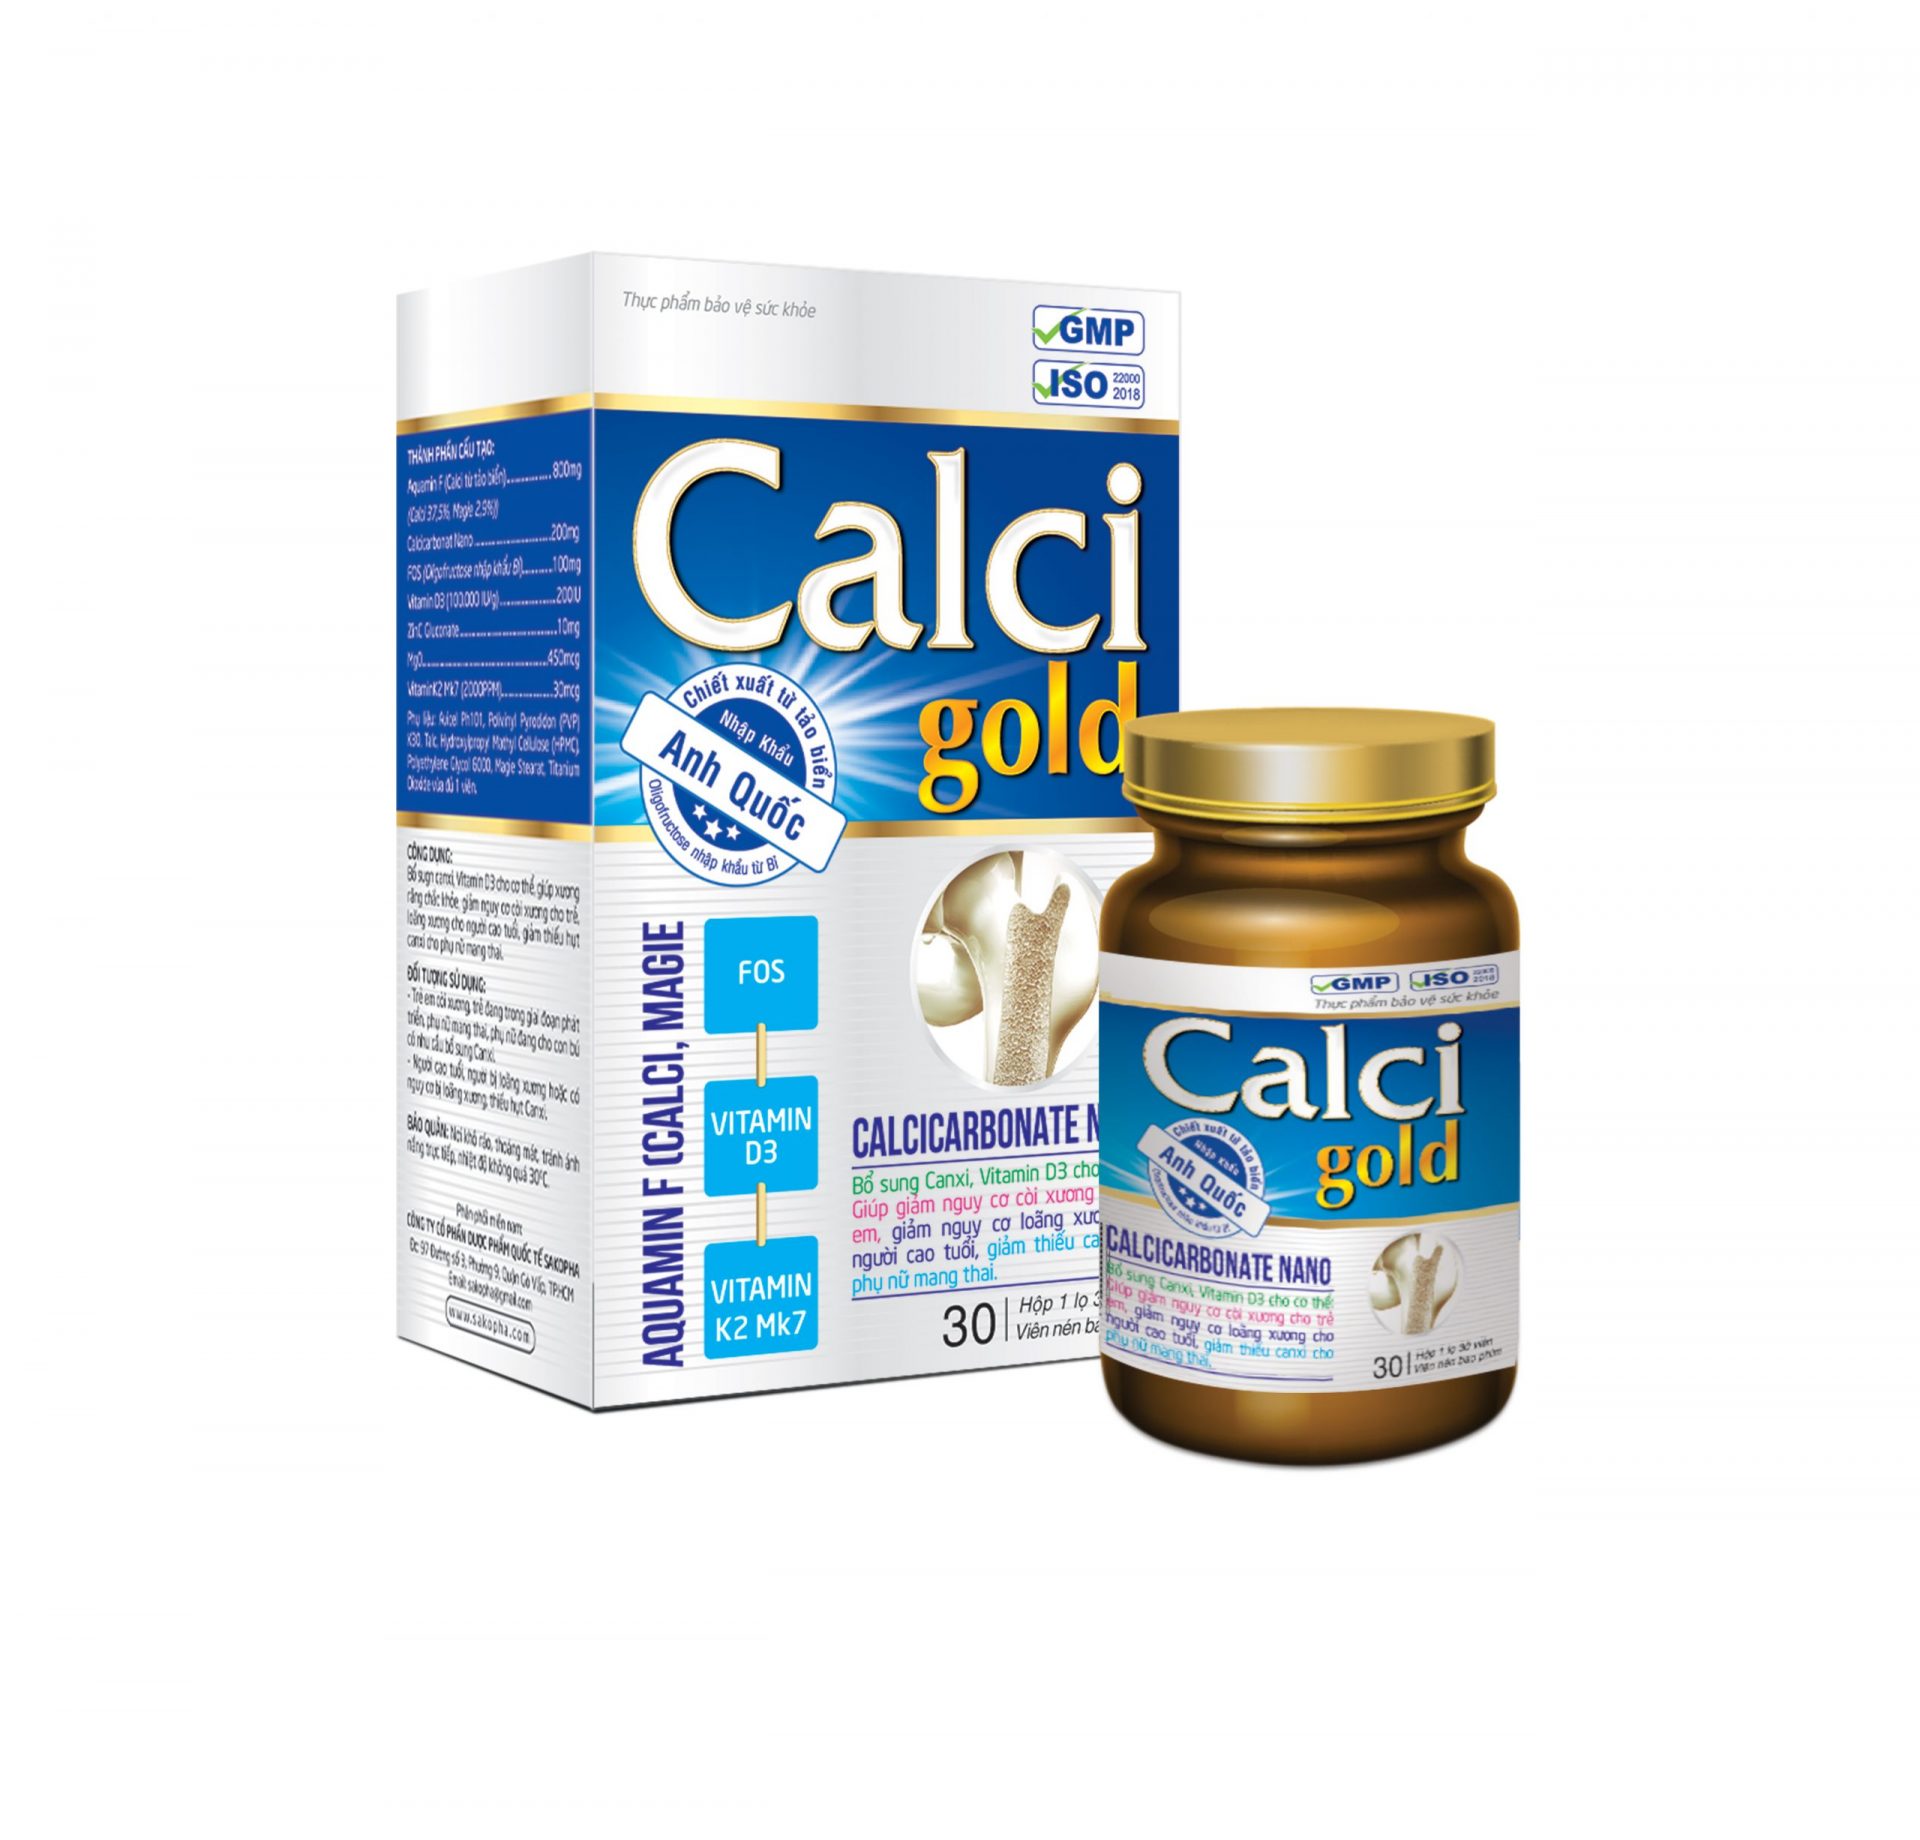 3D calci gold scaled 1